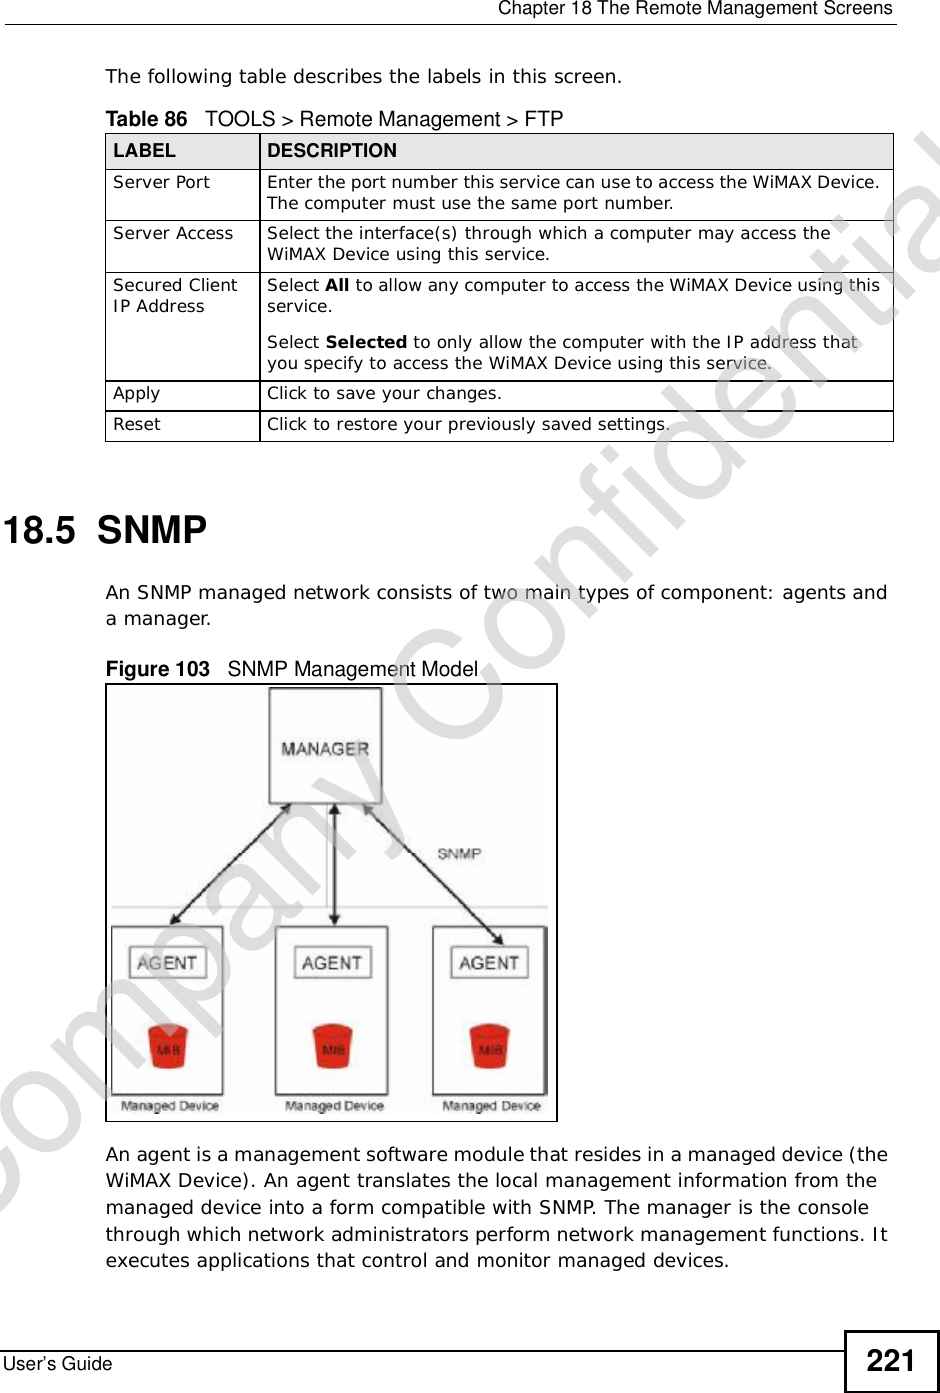  Chapter 18The Remote Management ScreensUser’s Guide 221The following table describes the labels in this screen.18.5  SNMPAn SNMP managed network consists of two main types of component: agents and a manager.Figure 103   SNMP Management ModelAn agent is a management software module that resides in a managed device (the WiMAX Device). An agent translates the local management information from the managed device into a form compatible with SNMP. The manager is the console through which network administrators perform network management functions. It executes applications that control and monitor managed devices. Table 86   TOOLS &gt; Remote Management &gt; FTPLABEL DESCRIPTIONServer Port Enter the port number this service can use to access the WiMAX Device. The computer must use the same port number.Server Access Select the interface(s) through which a computer may access the WiMAX Device using this service.Secured Client IP Address Select All to allow any computer to access the WiMAX Device using this service.Select Selected to only allow the computer with the IP address that you specify to access the WiMAX Device using this service.Apply Click to save your changes.Reset Click to restore your previously saved settings.Company Confidential